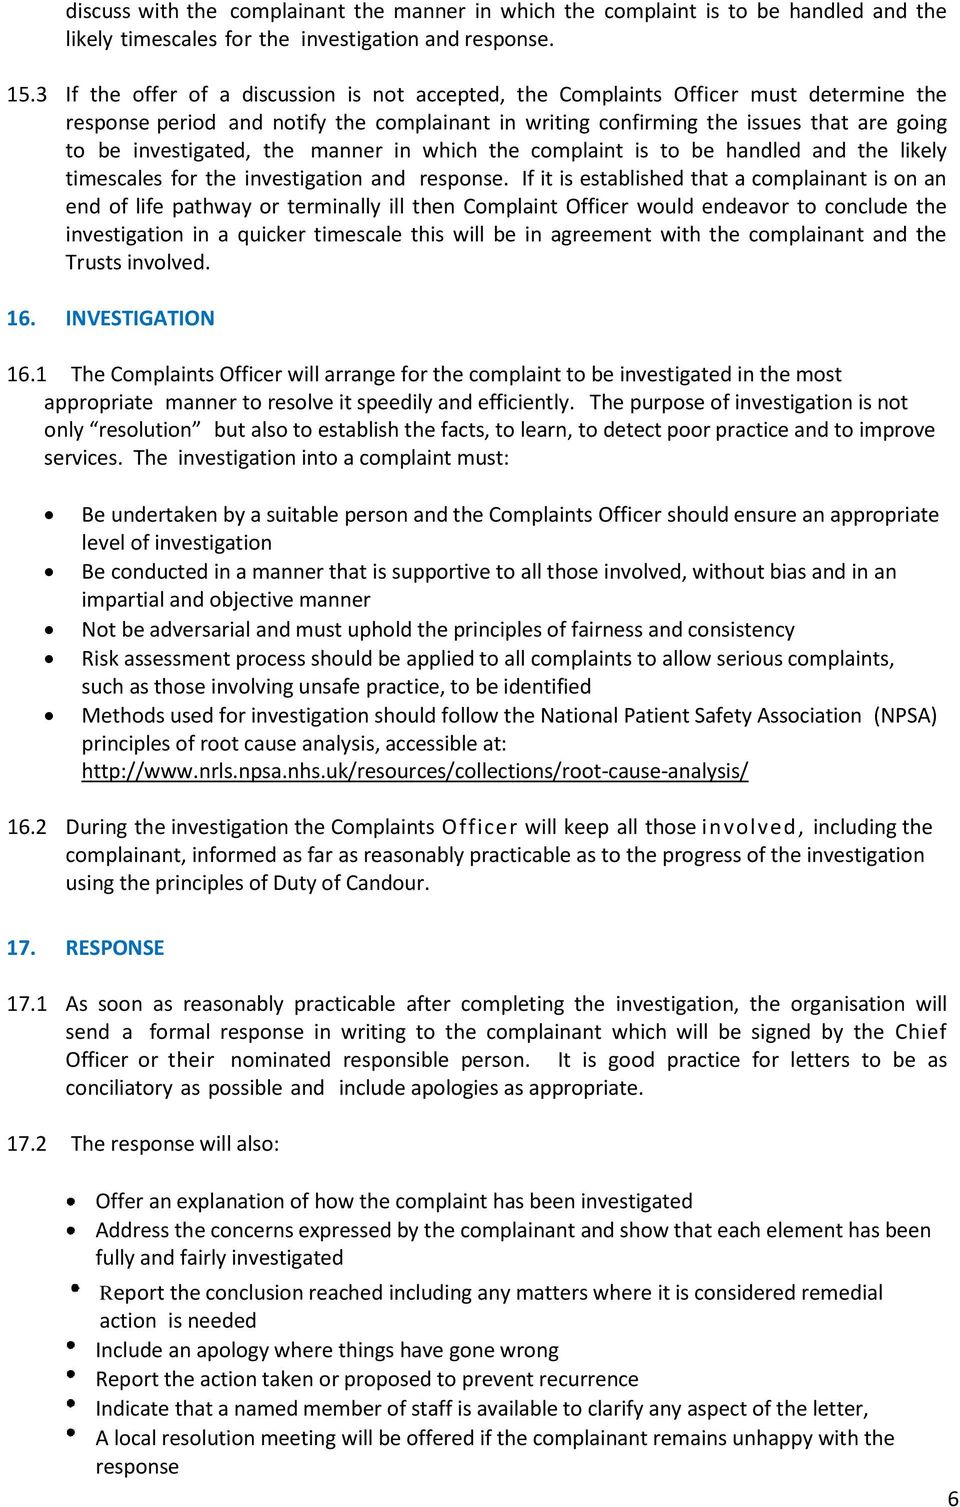 investigated, the manner in which the complaint is to be handled and the likely timescales for the investigation and response.